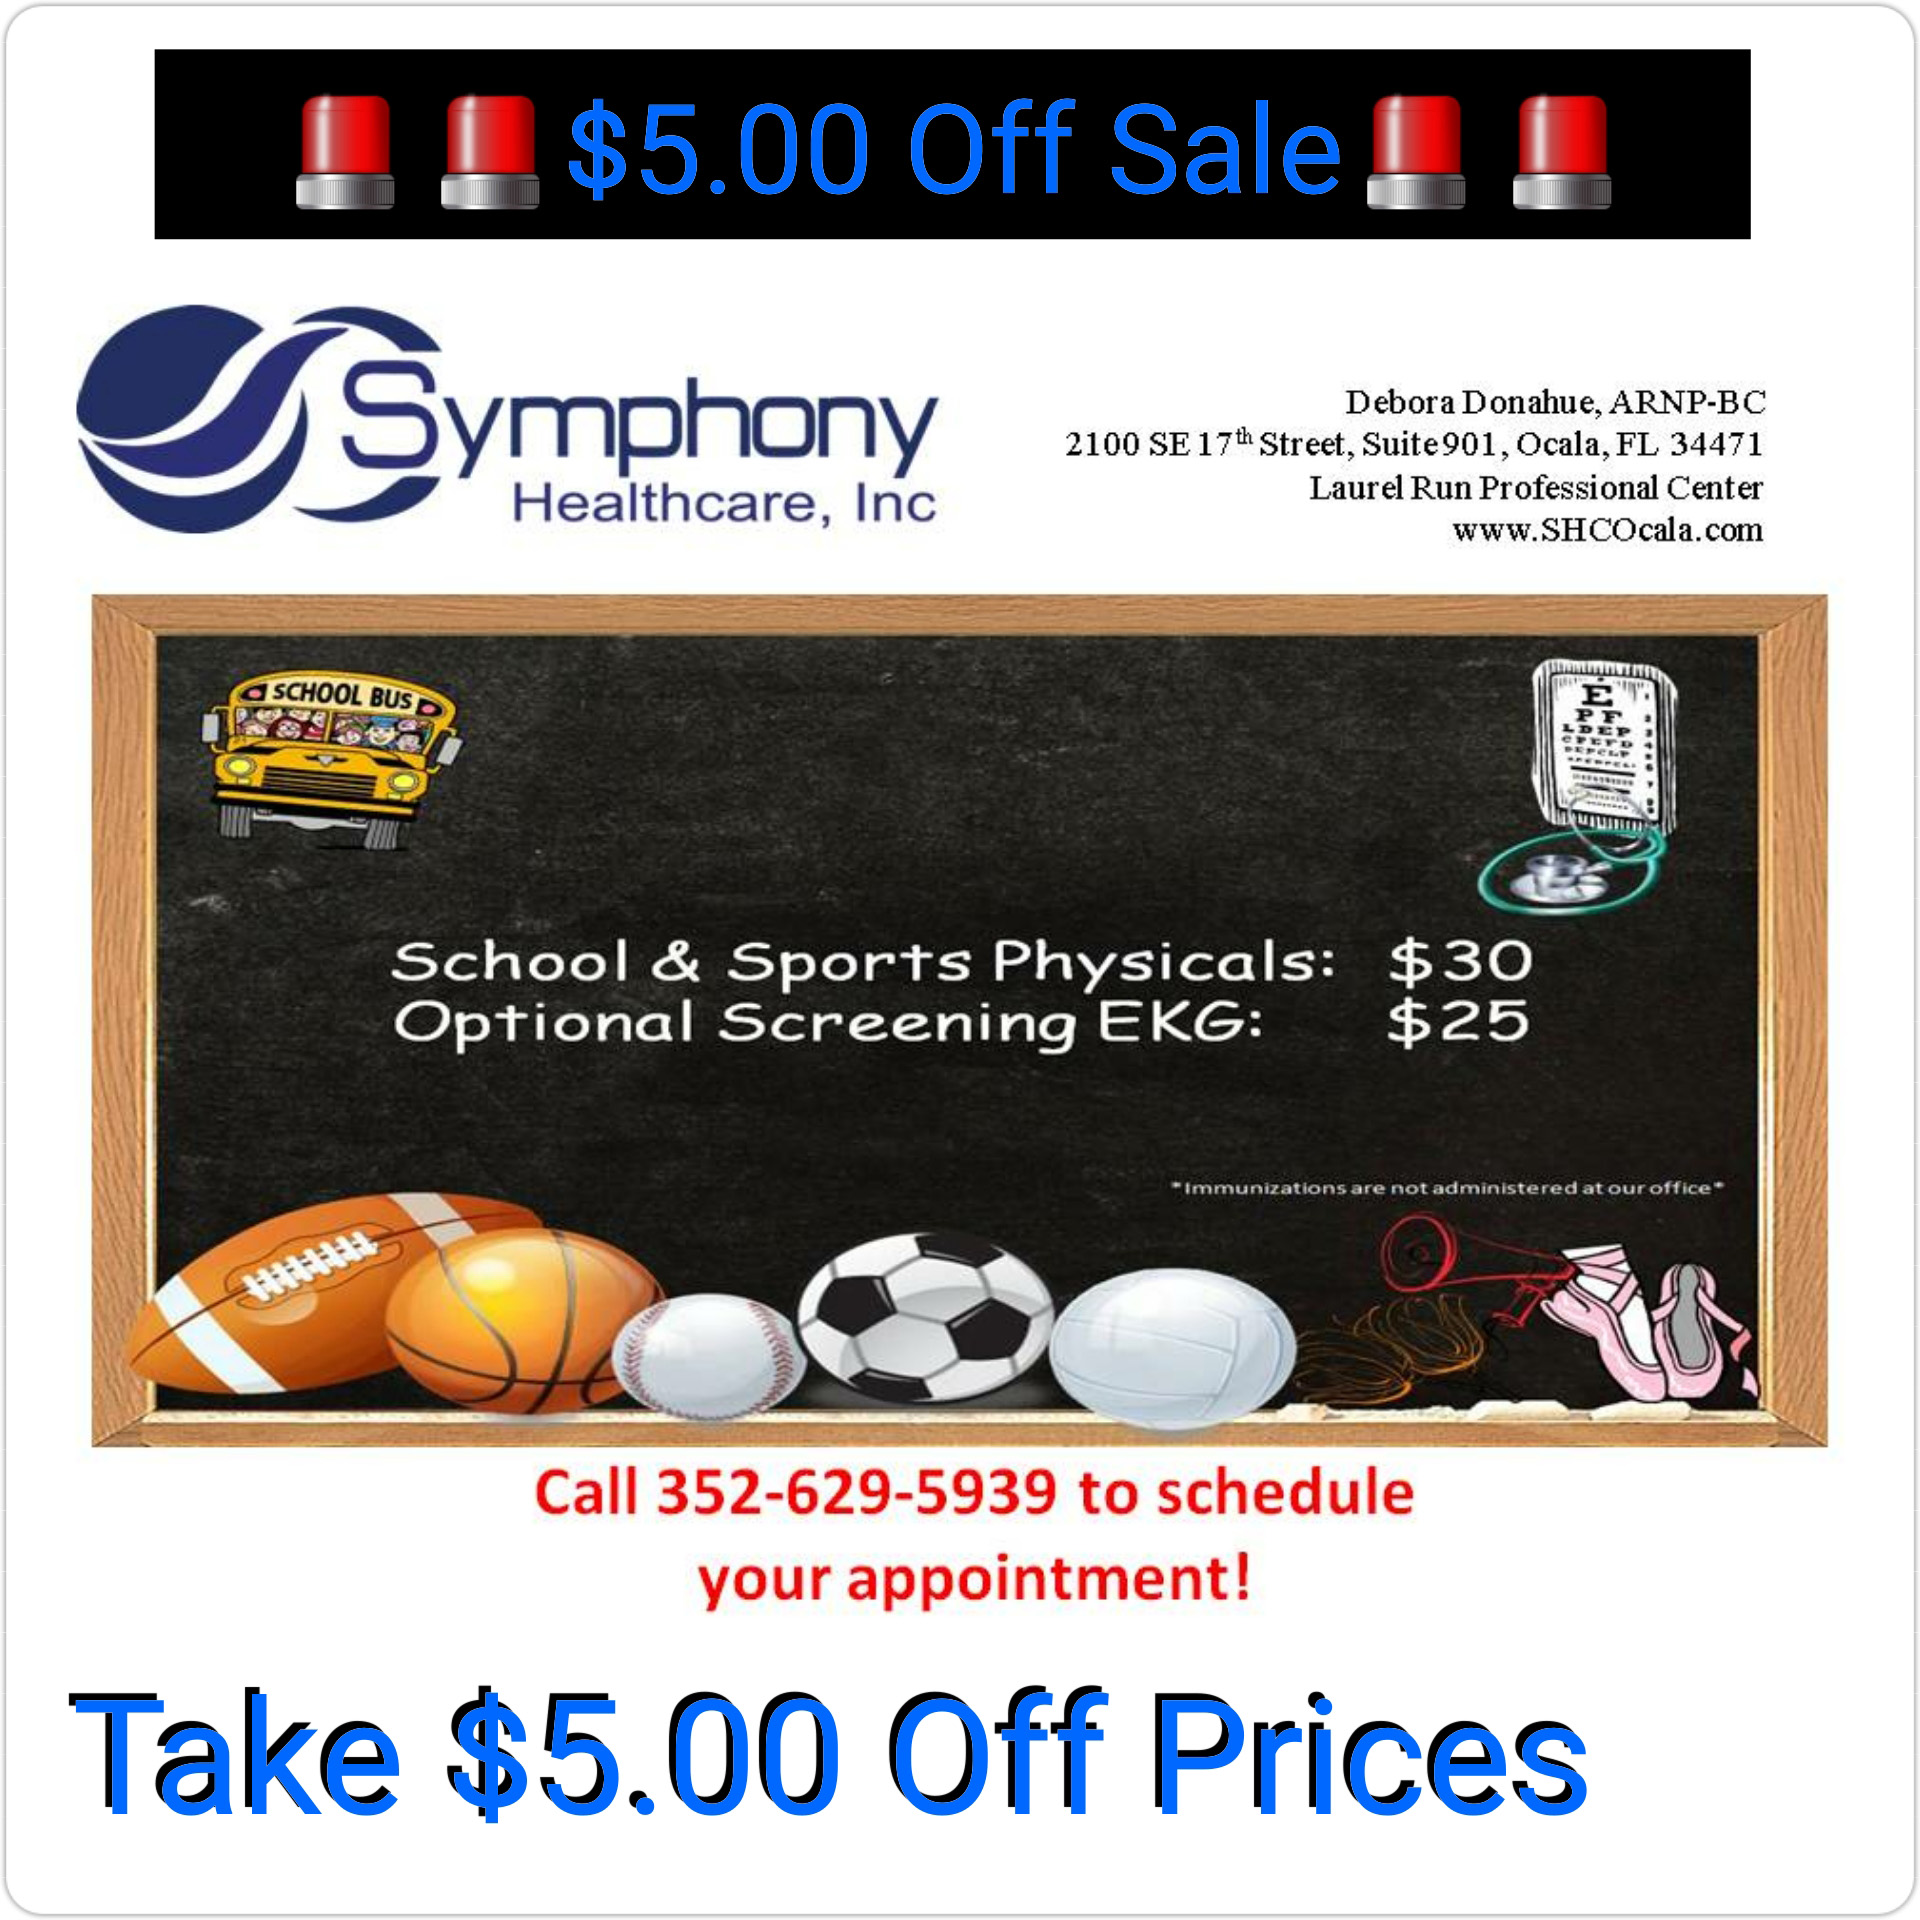 back to school, ocala news, coupon for physicals, symphony healthcare, ocala post